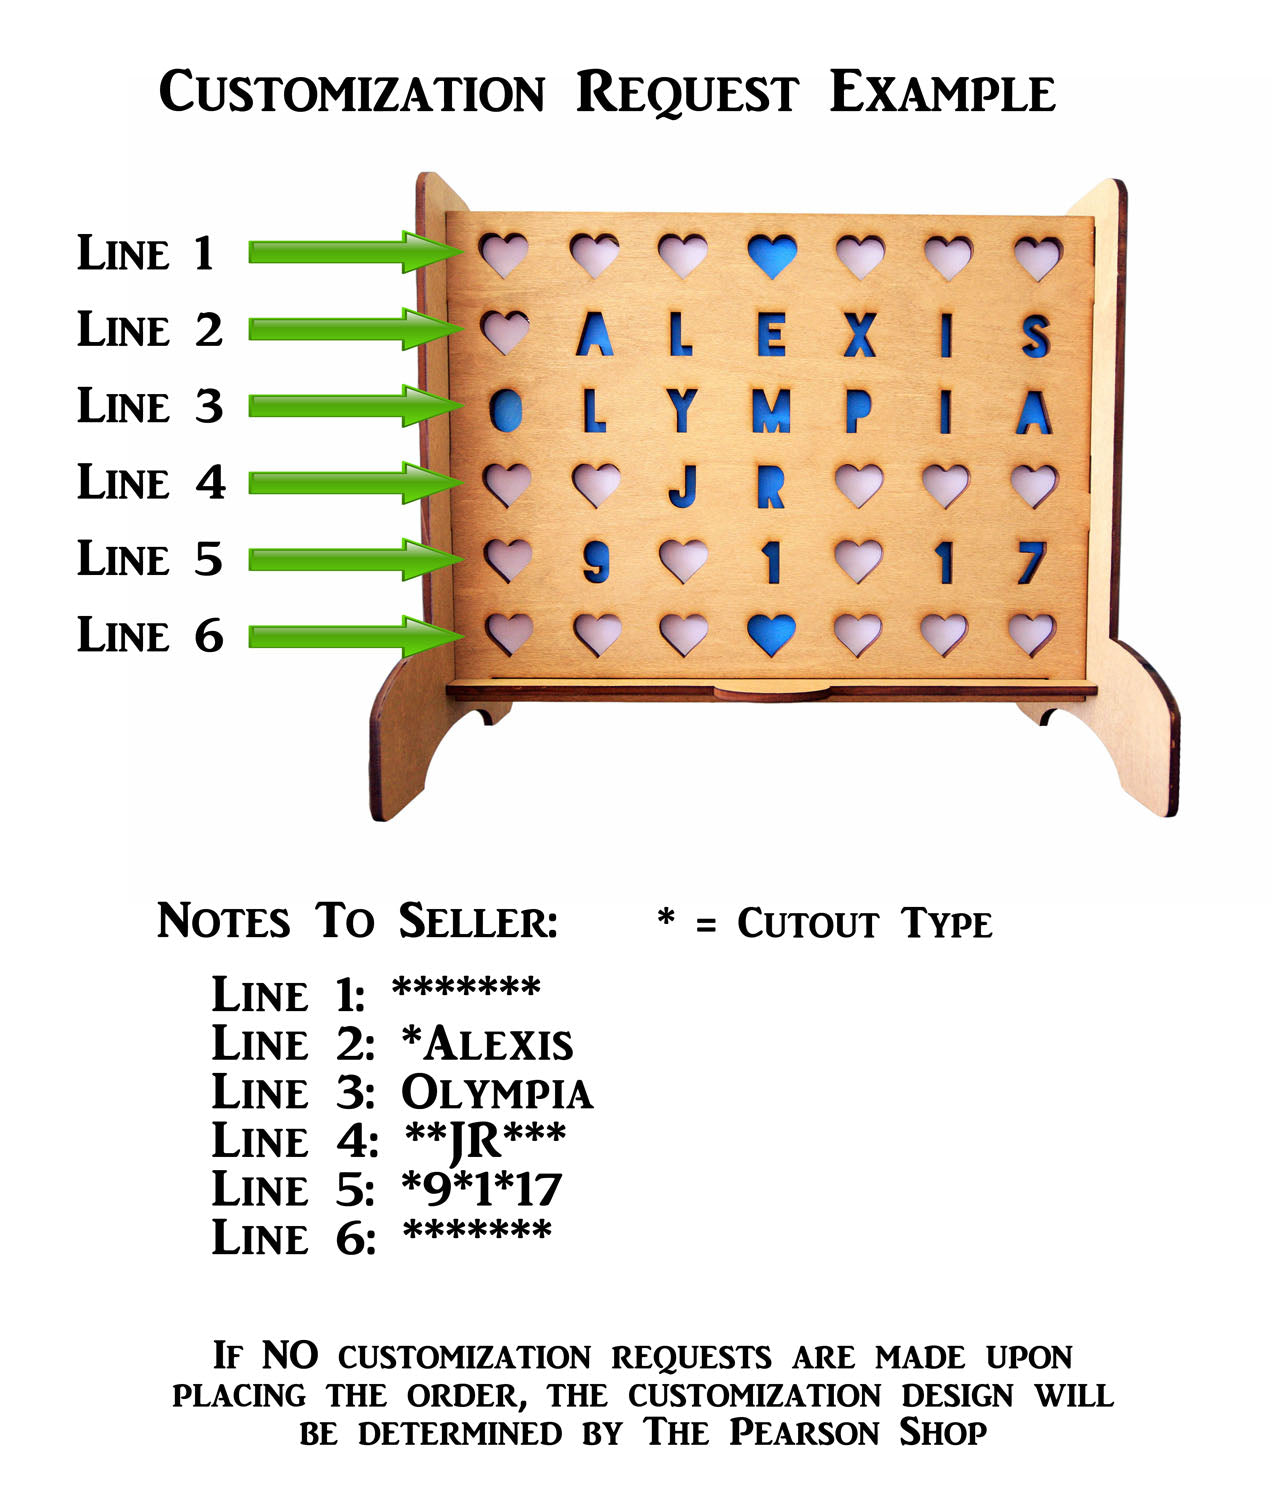 Connect 4 Giant or JR Personalized Custom Cutout Game